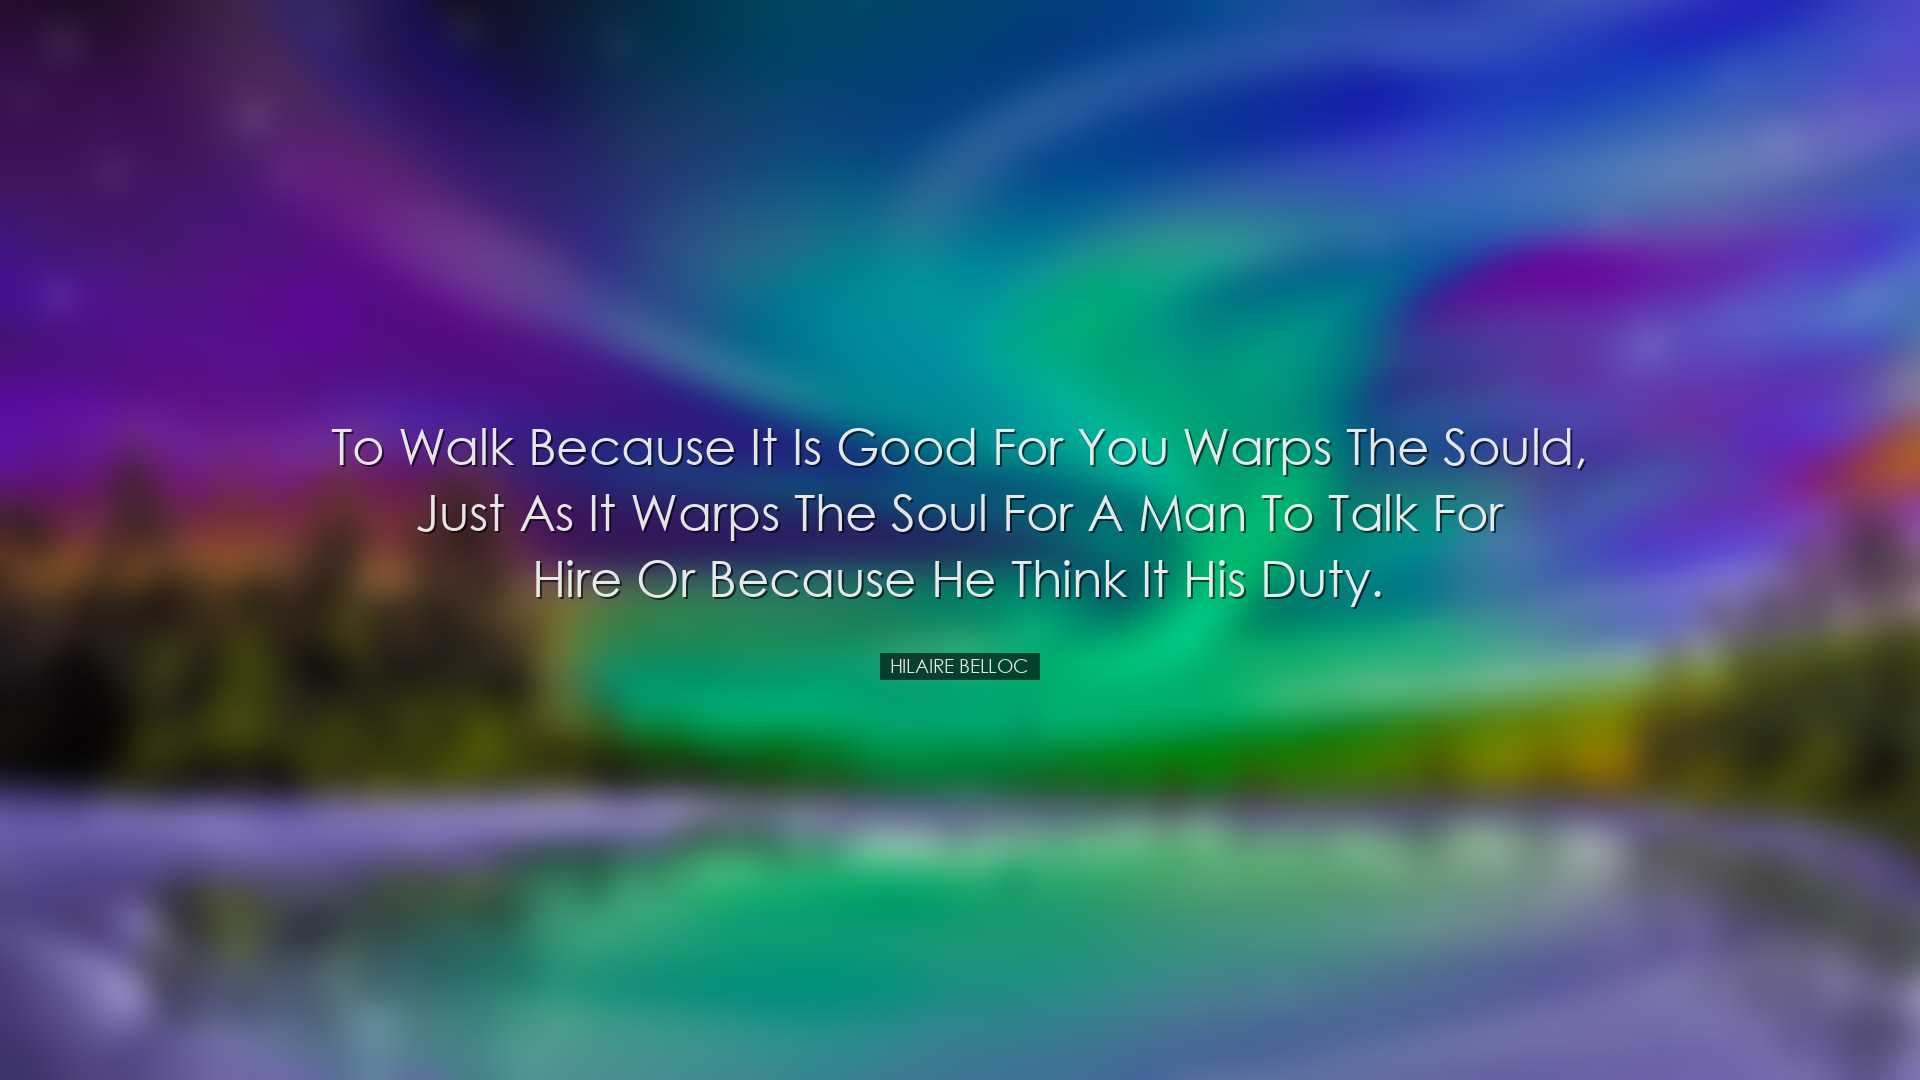 To walk because it is good for you warps the sould, just as it war